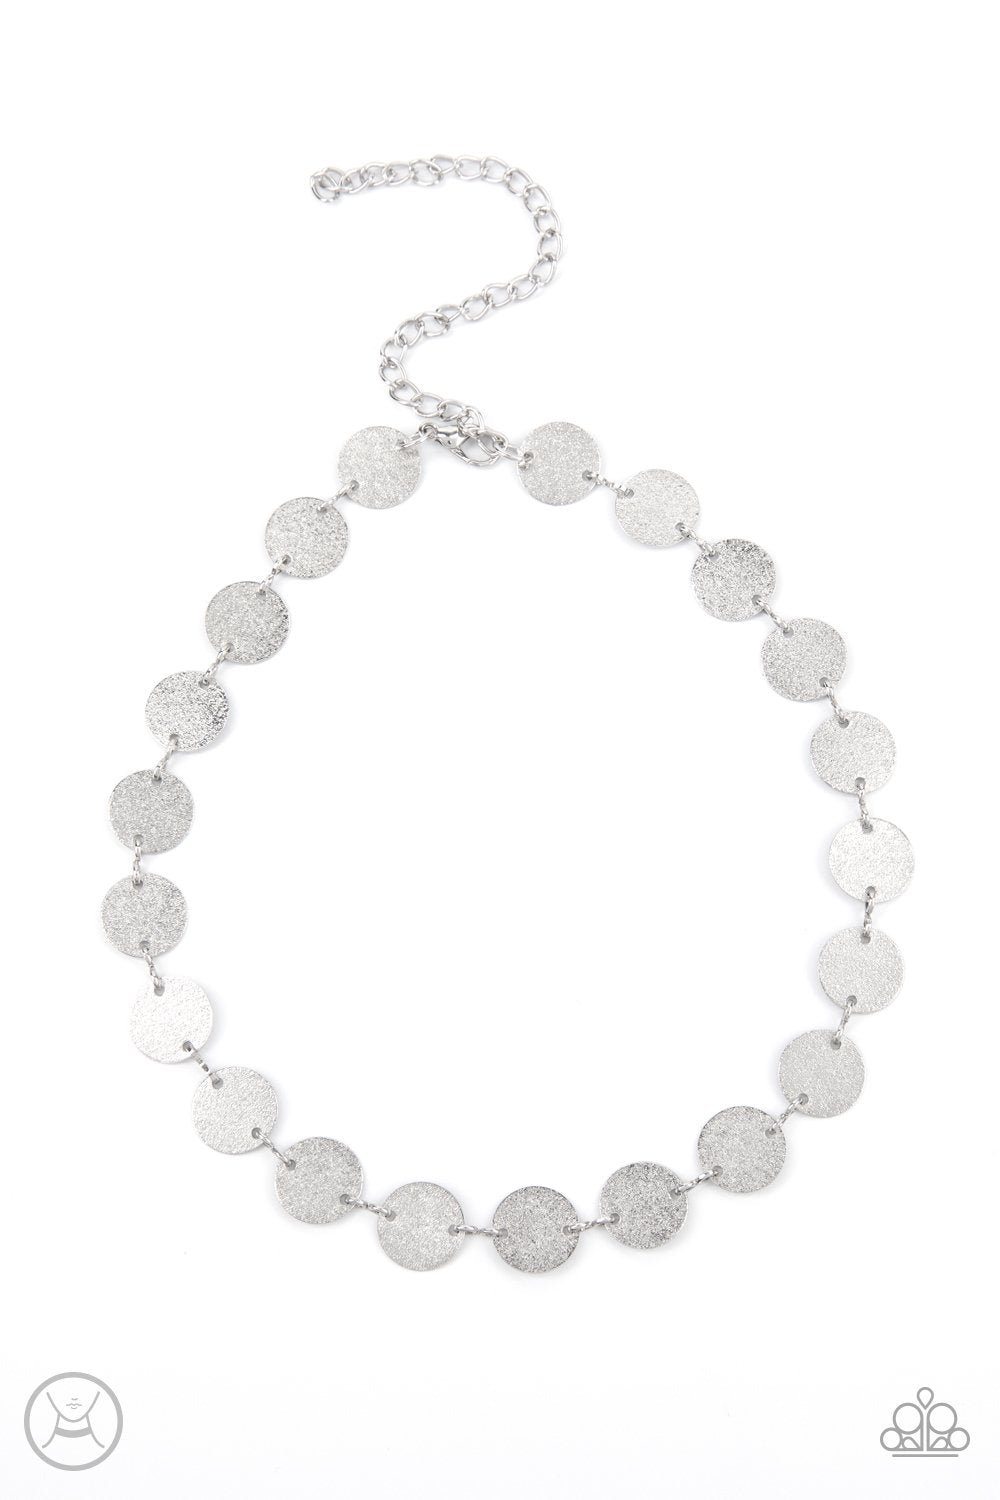 Reflection Detection Silver Choker Necklace - Paparazzi Accessories- lightbox - CarasShop.com - $5 Jewelry by Cara Jewels